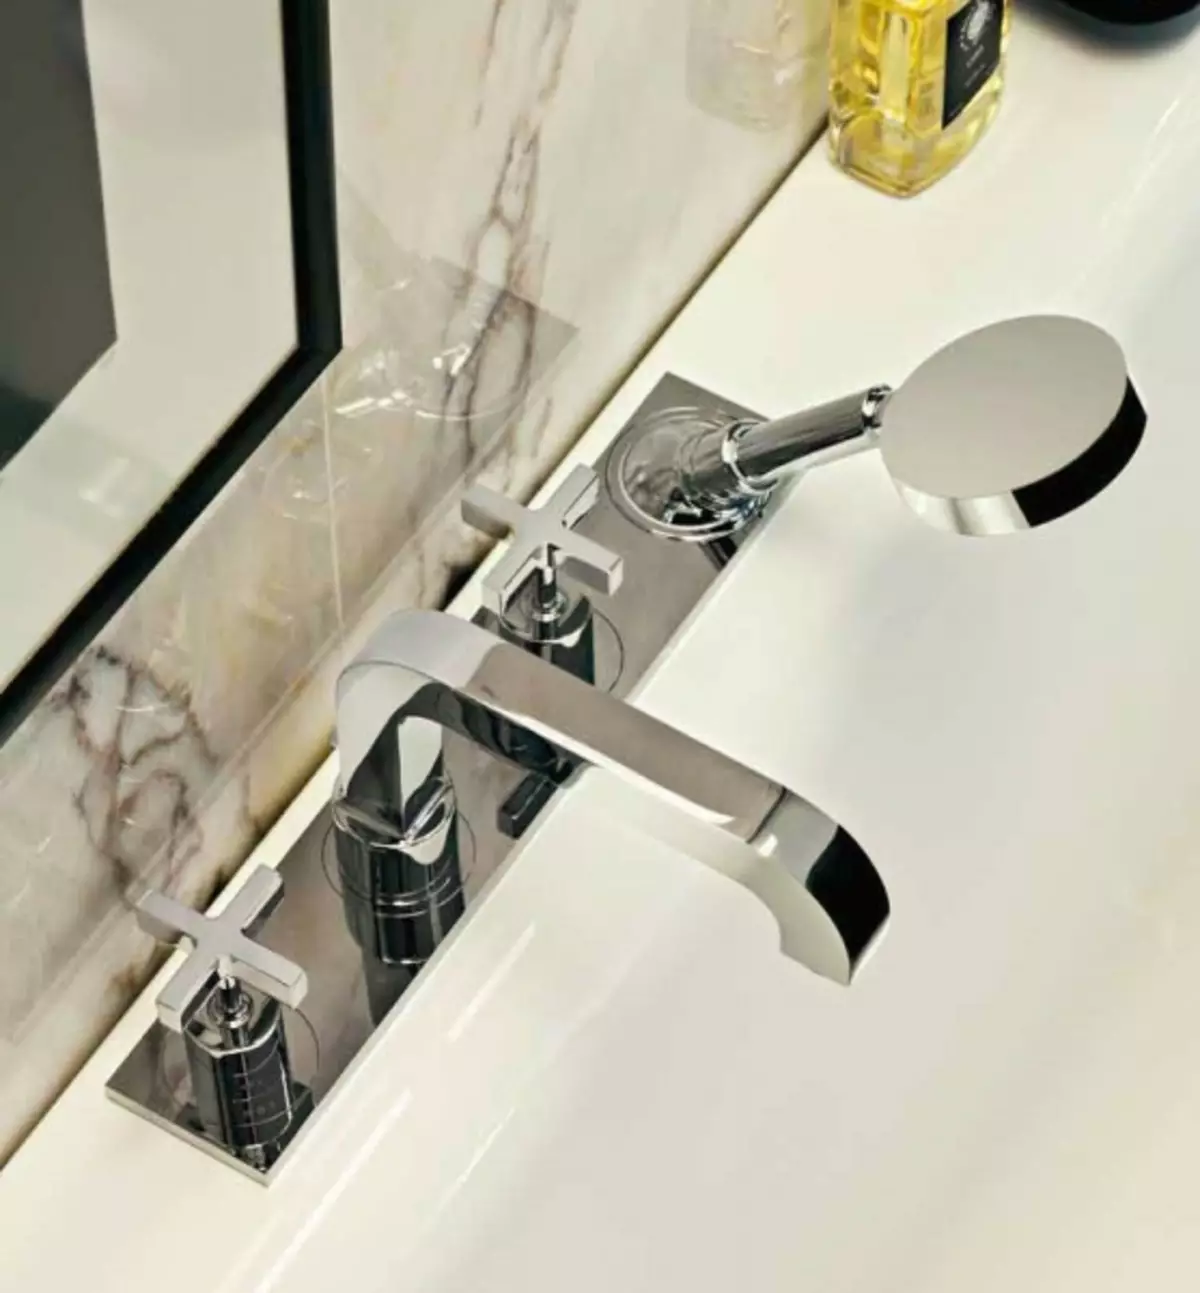 Bath Mixer: Convenience and Unsurpassed Style